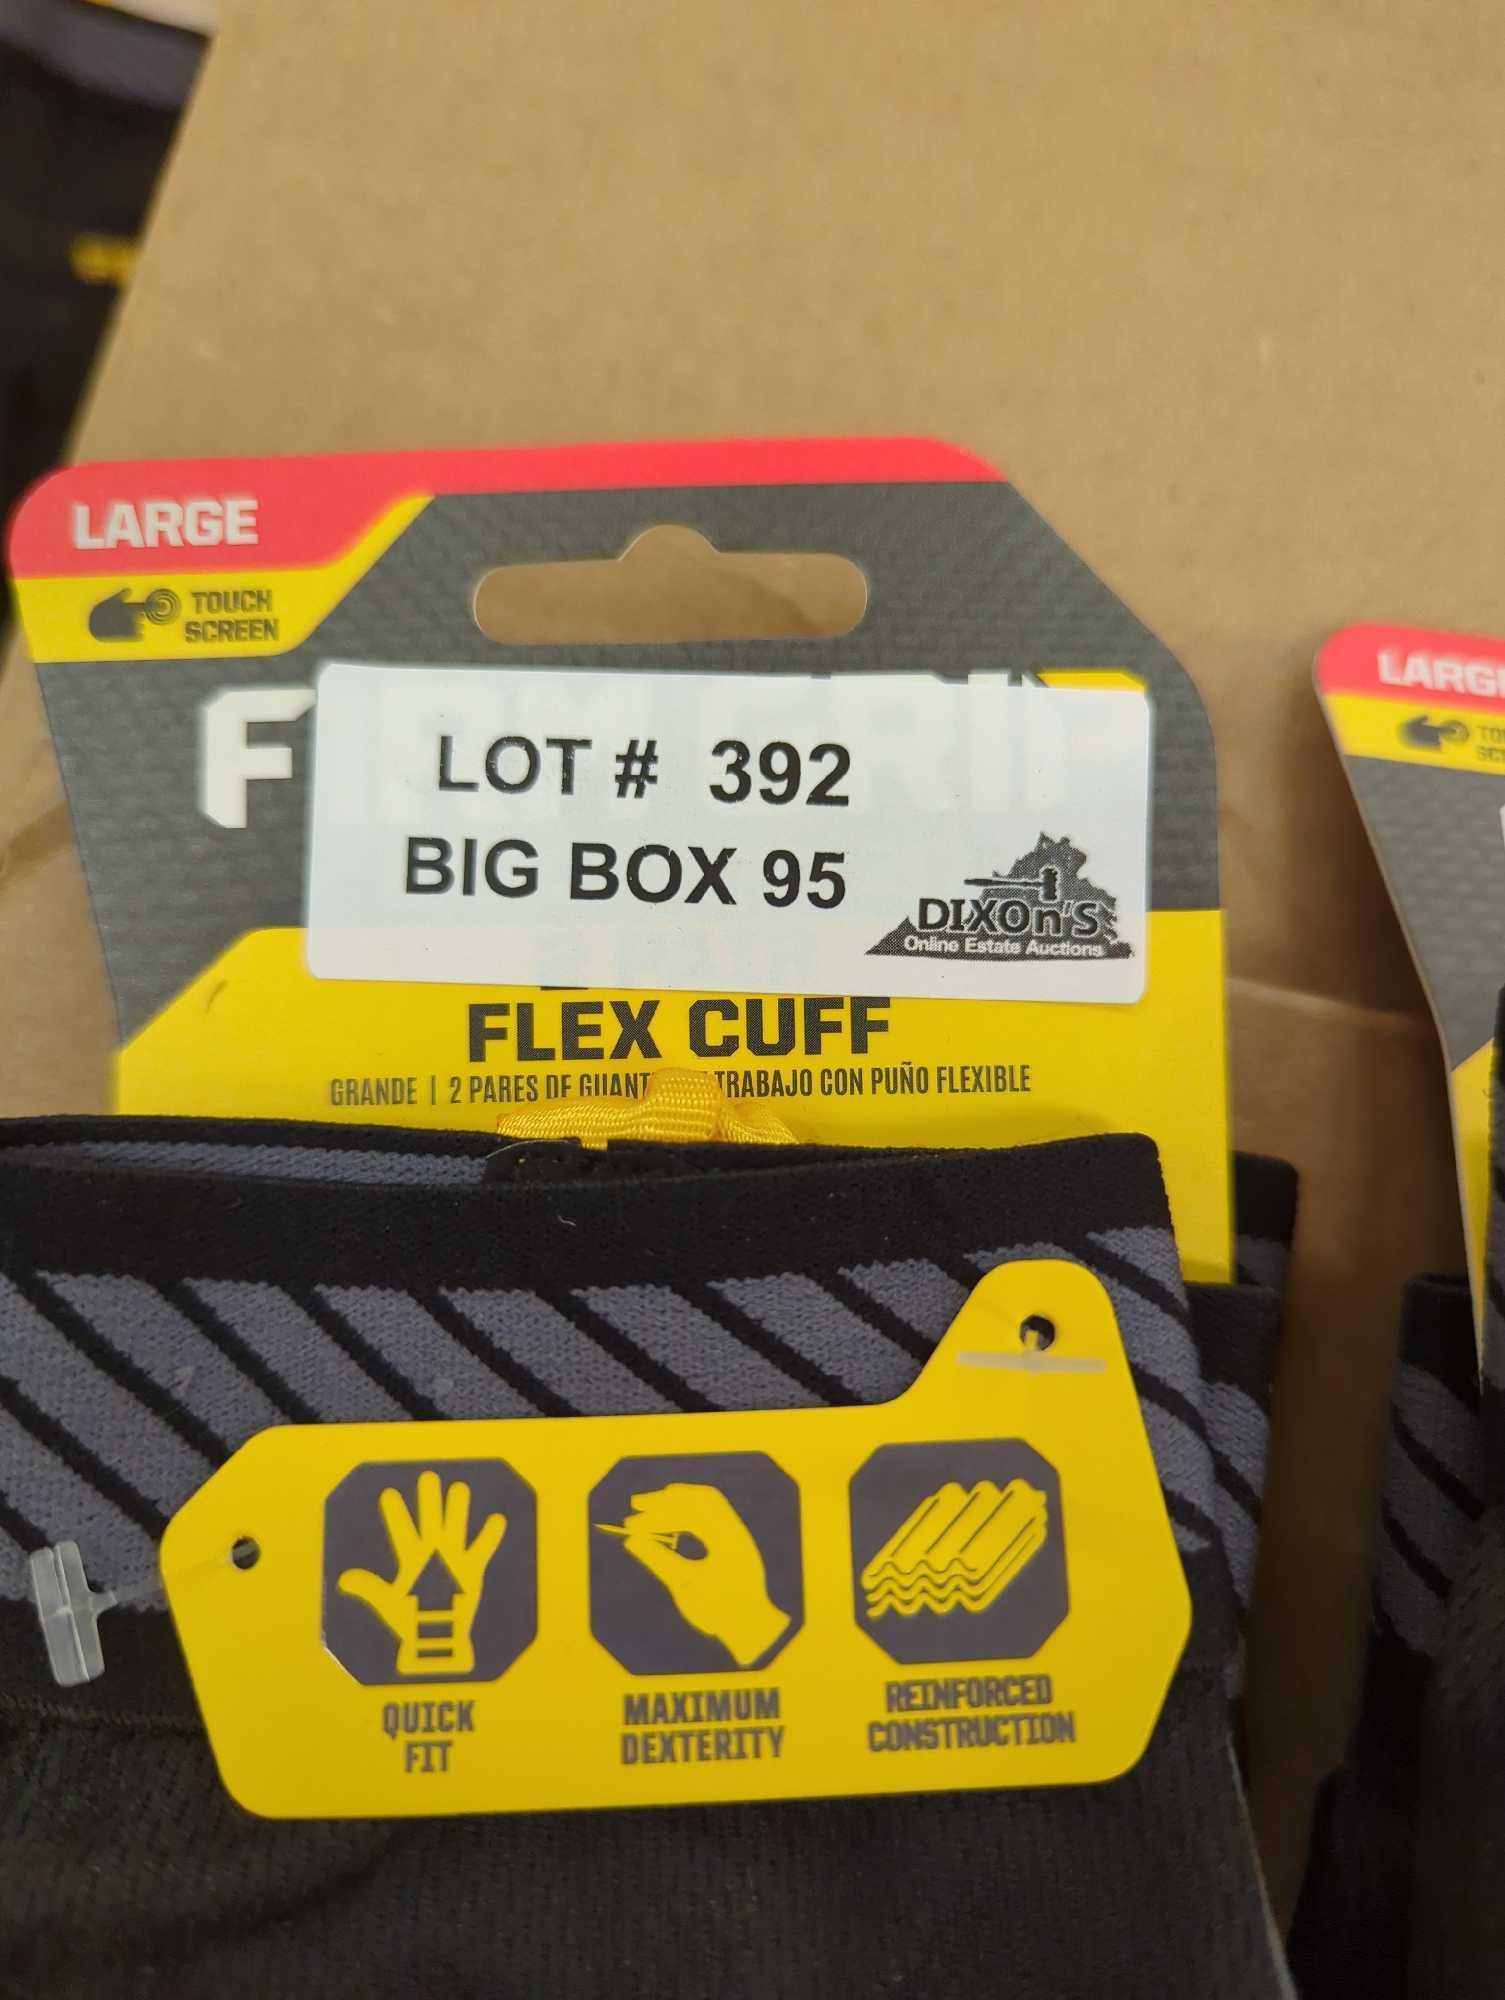 Lot of 3 Packs of FIRM GRIP Large Flex Cuff Outdoor and Work Gloves (2-Pack), Appears to be New